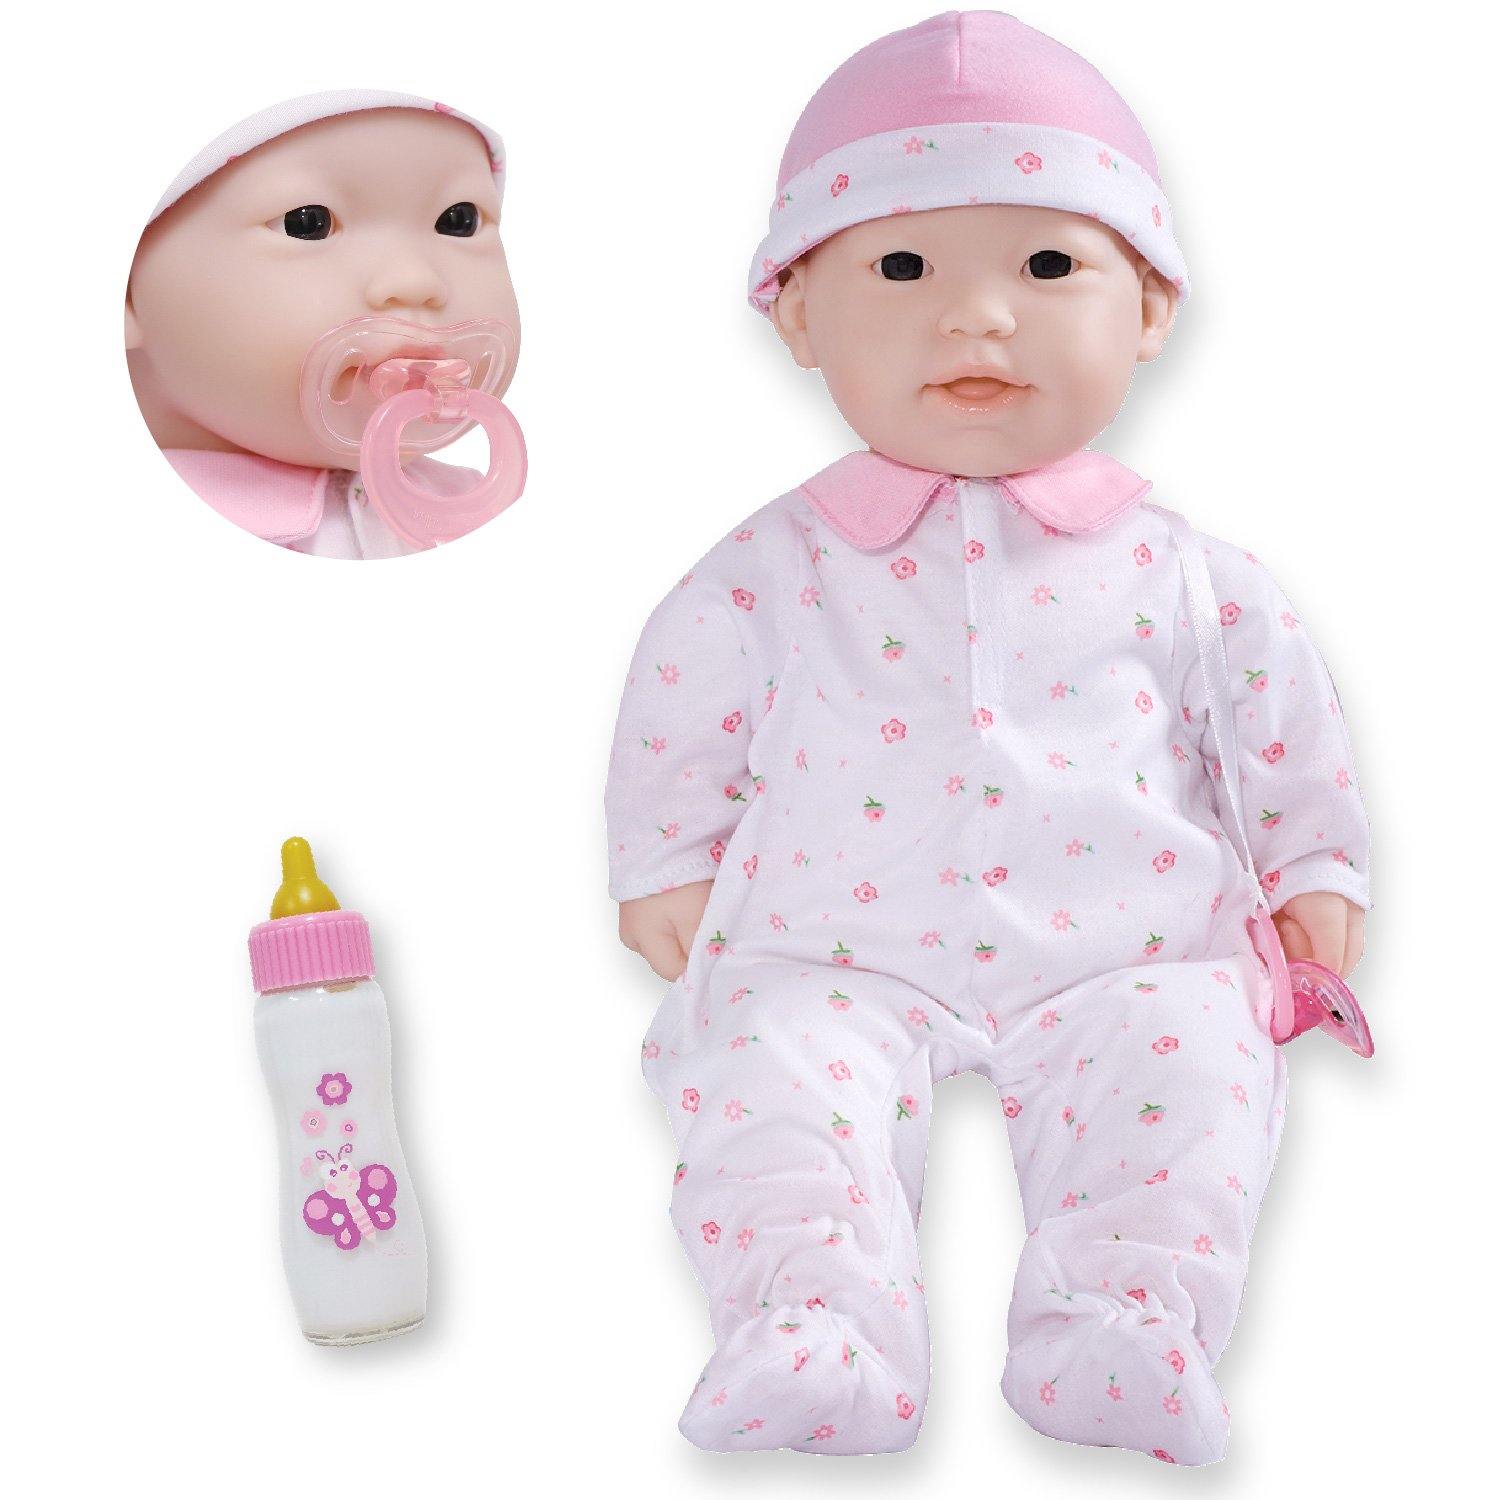 JC Toys, La Baby 16 inches Soft Body Asian Baby Doll in Pink Outfit - JC Toys Group Inc.